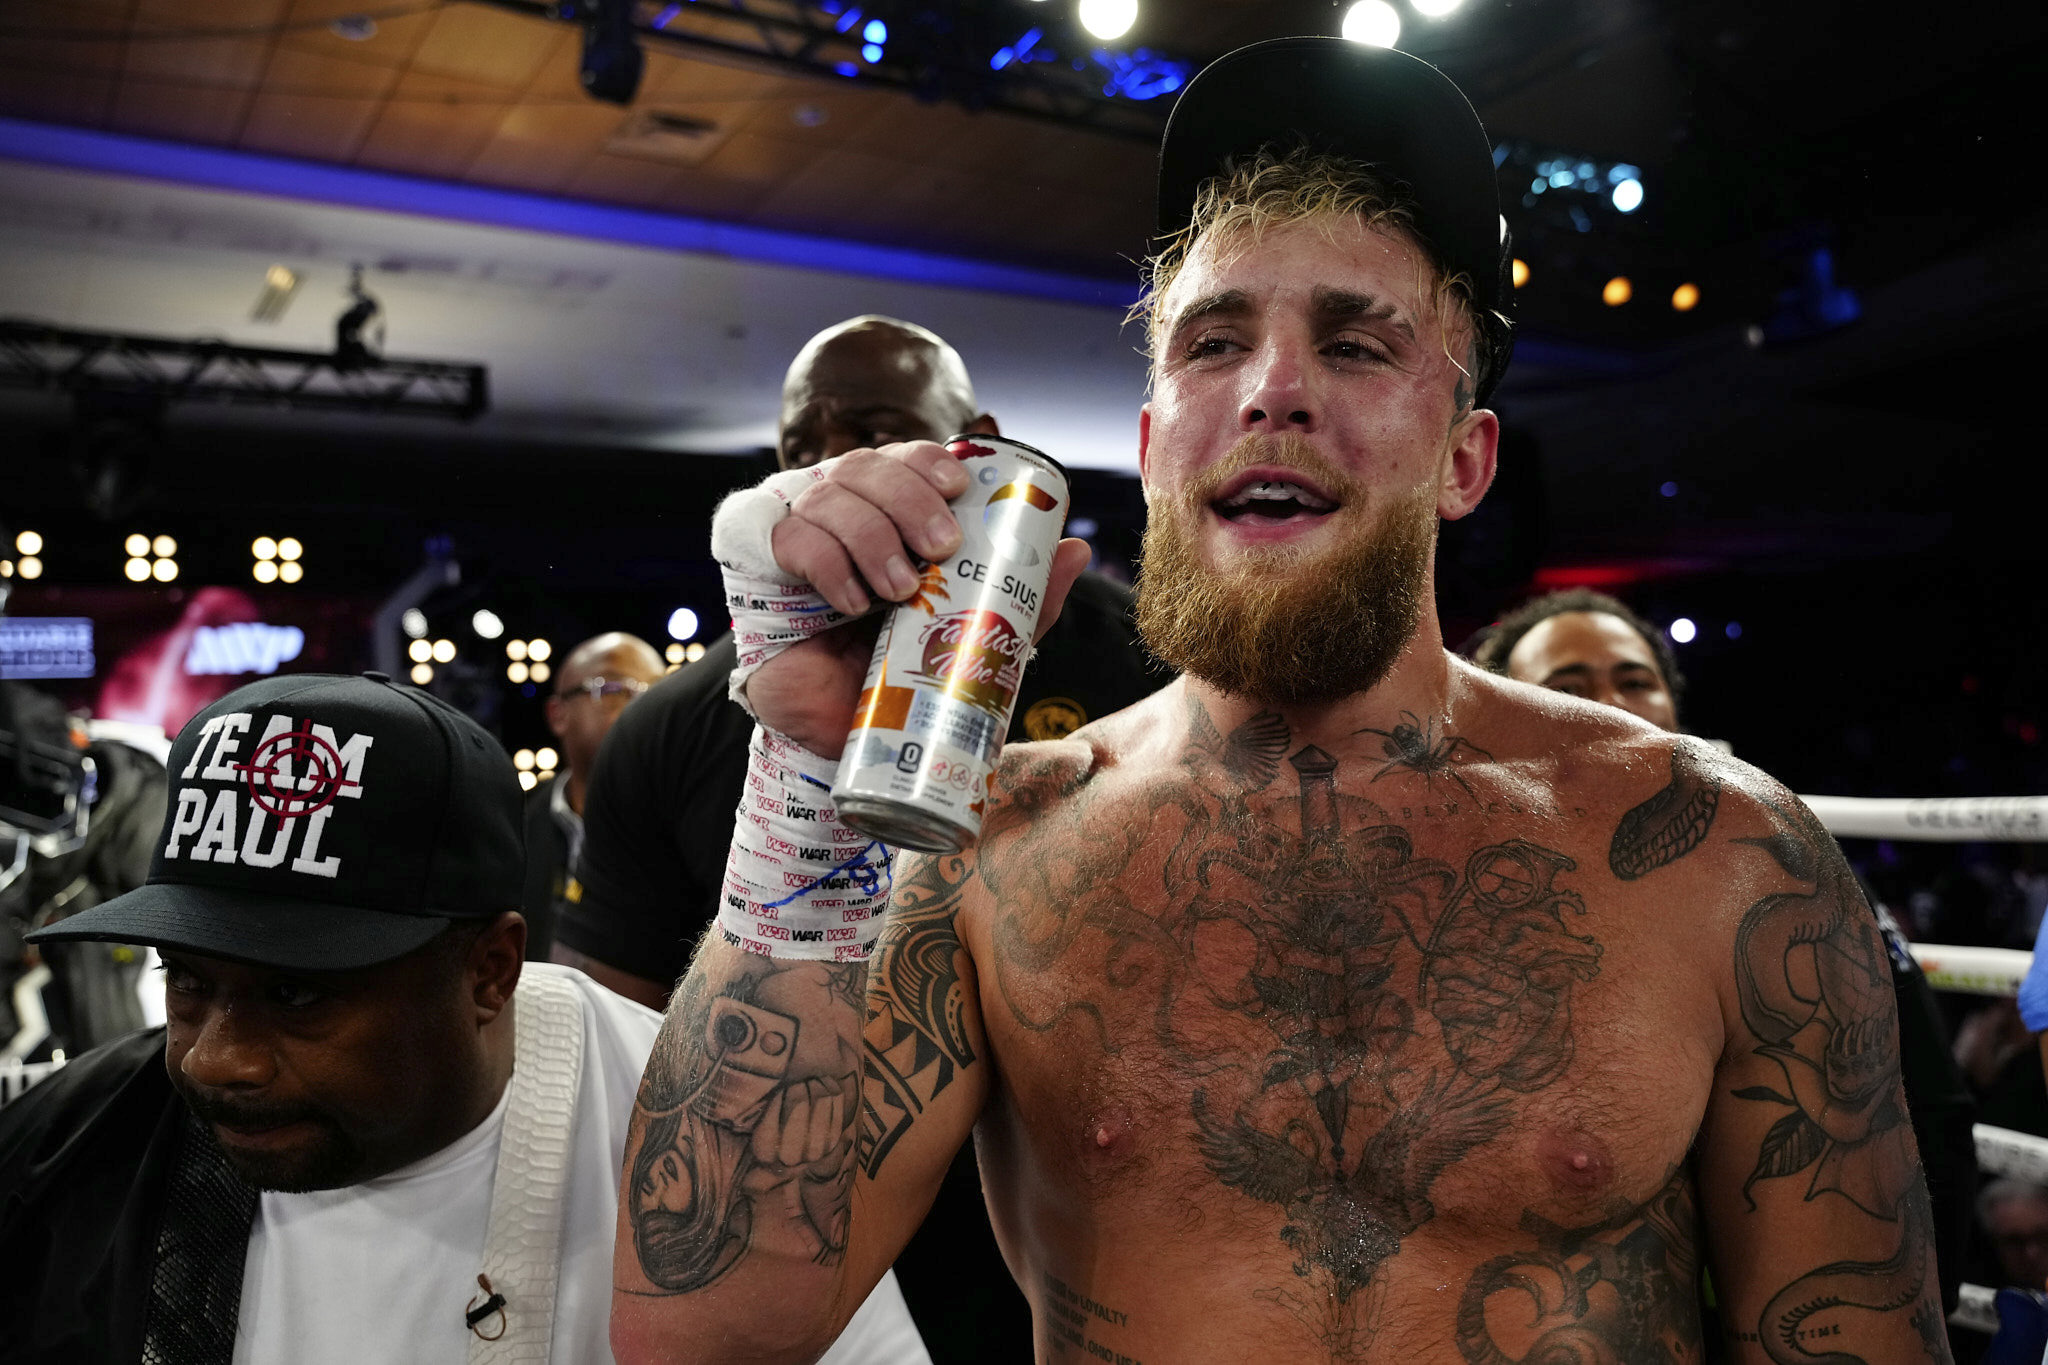 jake paul focused on completing 'one of the greatest sports stories' ever after blistering ko of andre august